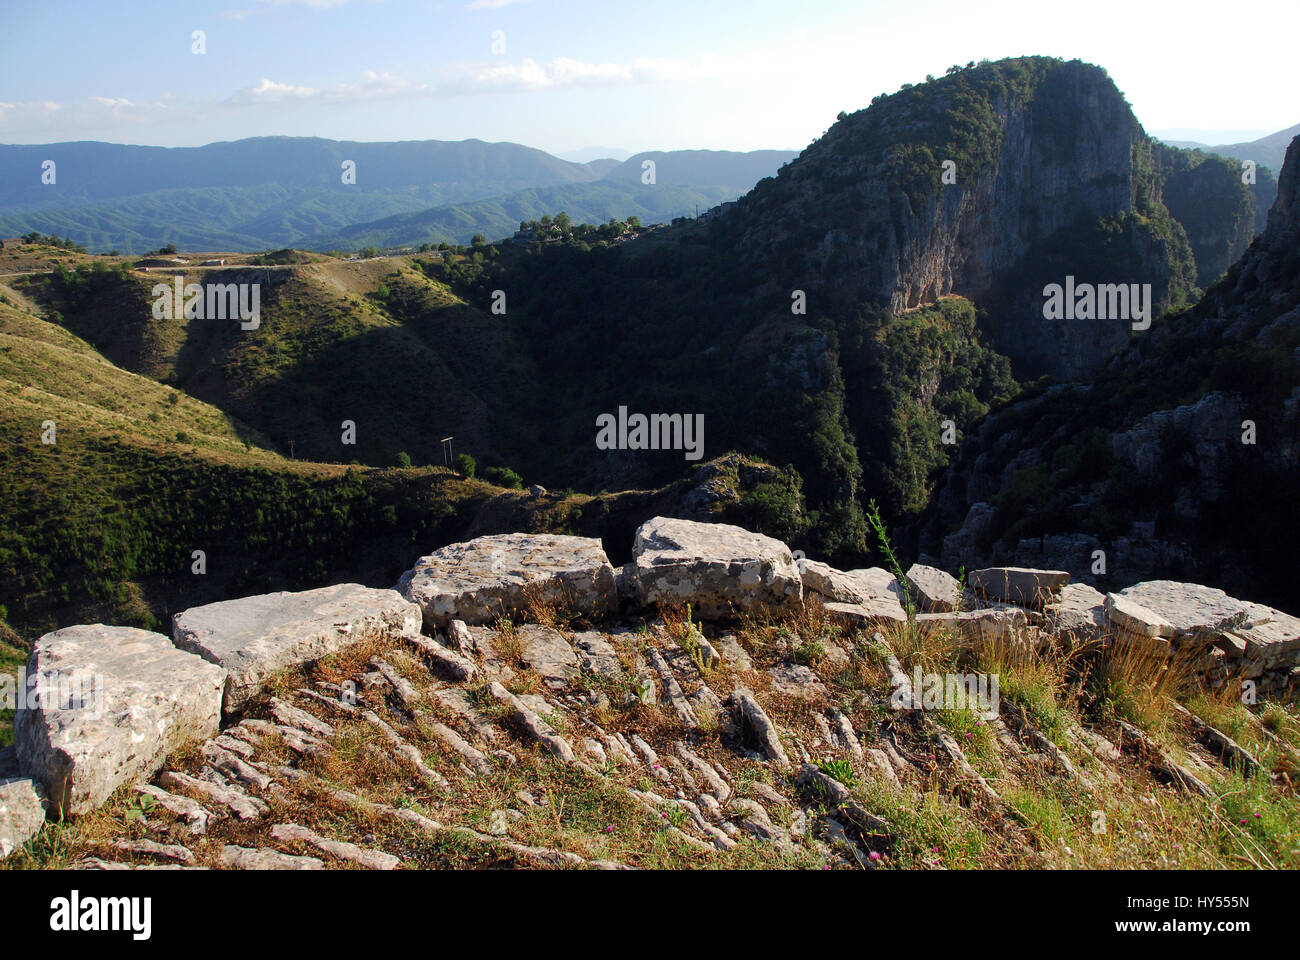 The giant stone steps of Vradeto village and the Beloi viewpoint 0f Vicos Canyon, Zagoria villages, Epirus region, Greece Stock Photo